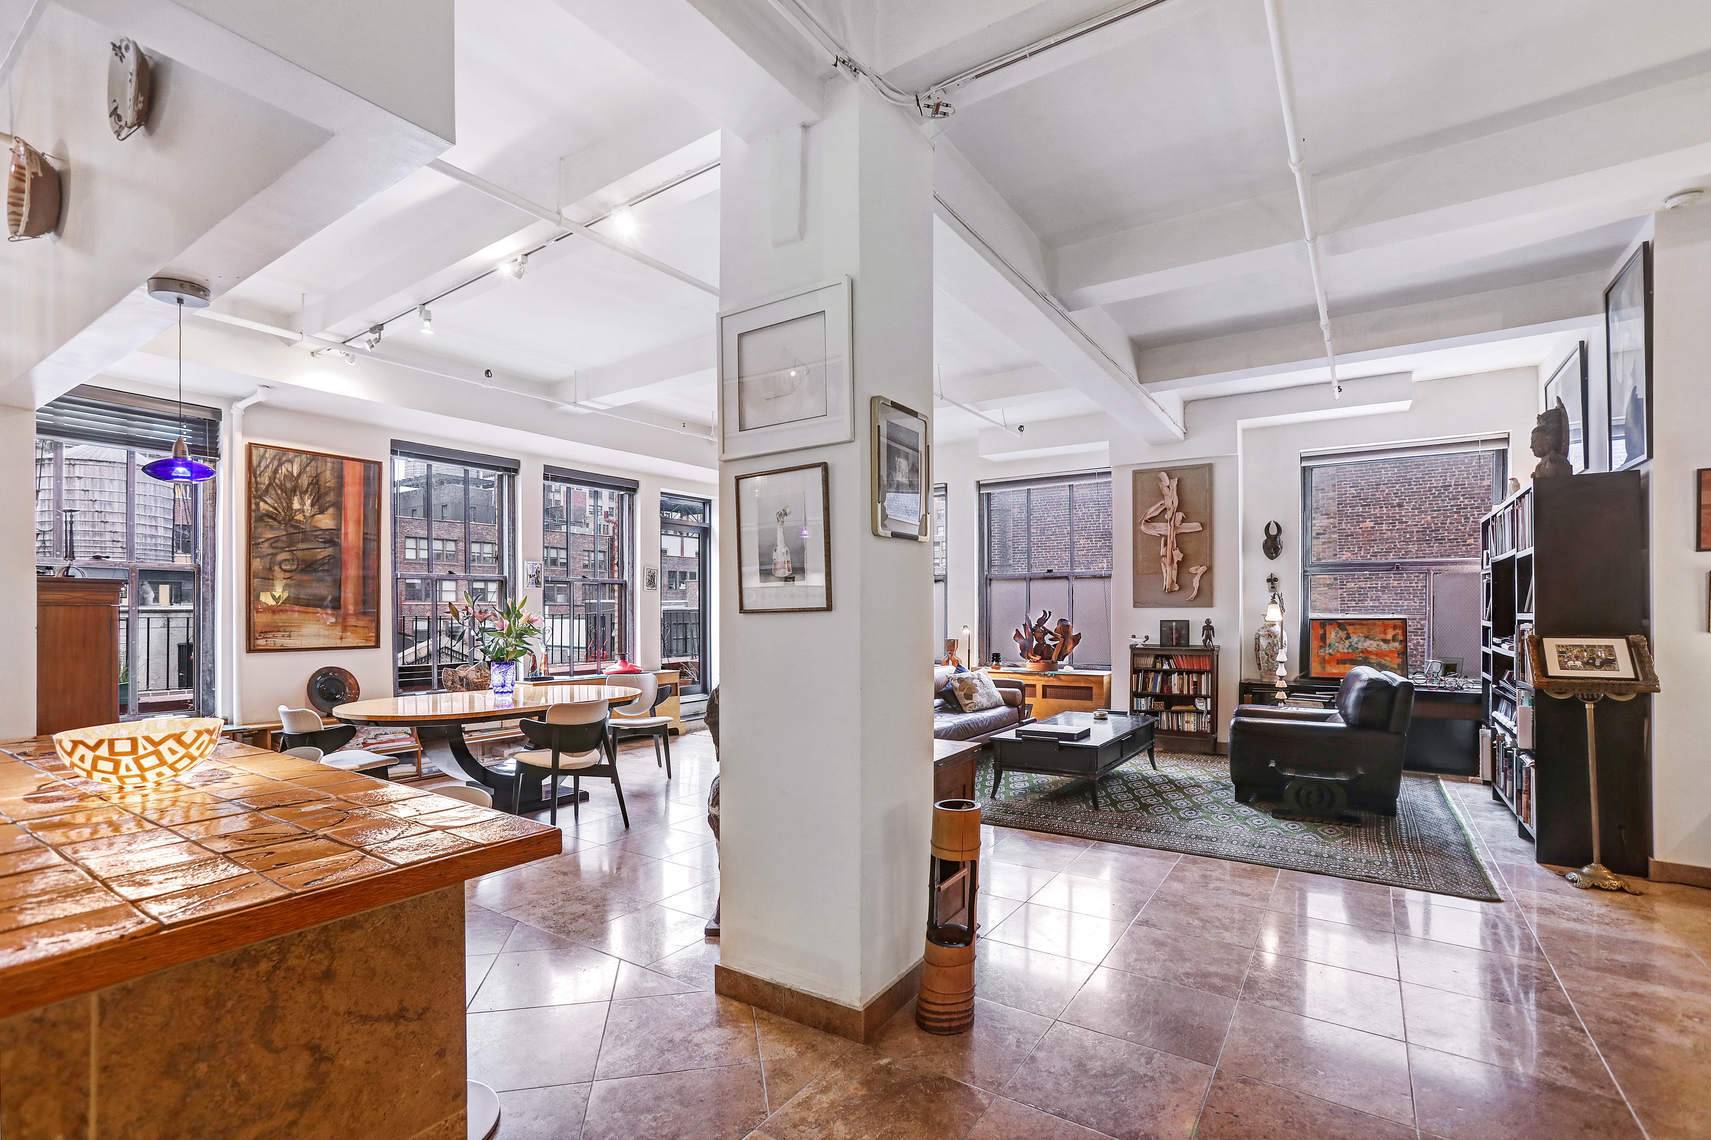 Ideal central midtown Manhattan location steps to Penn Station with easy access to the A, C, 1, 2, 3, R, Q, N, LIRR, PATH trains, AMTRAK, and Lincoln Tunnel Rarely ...